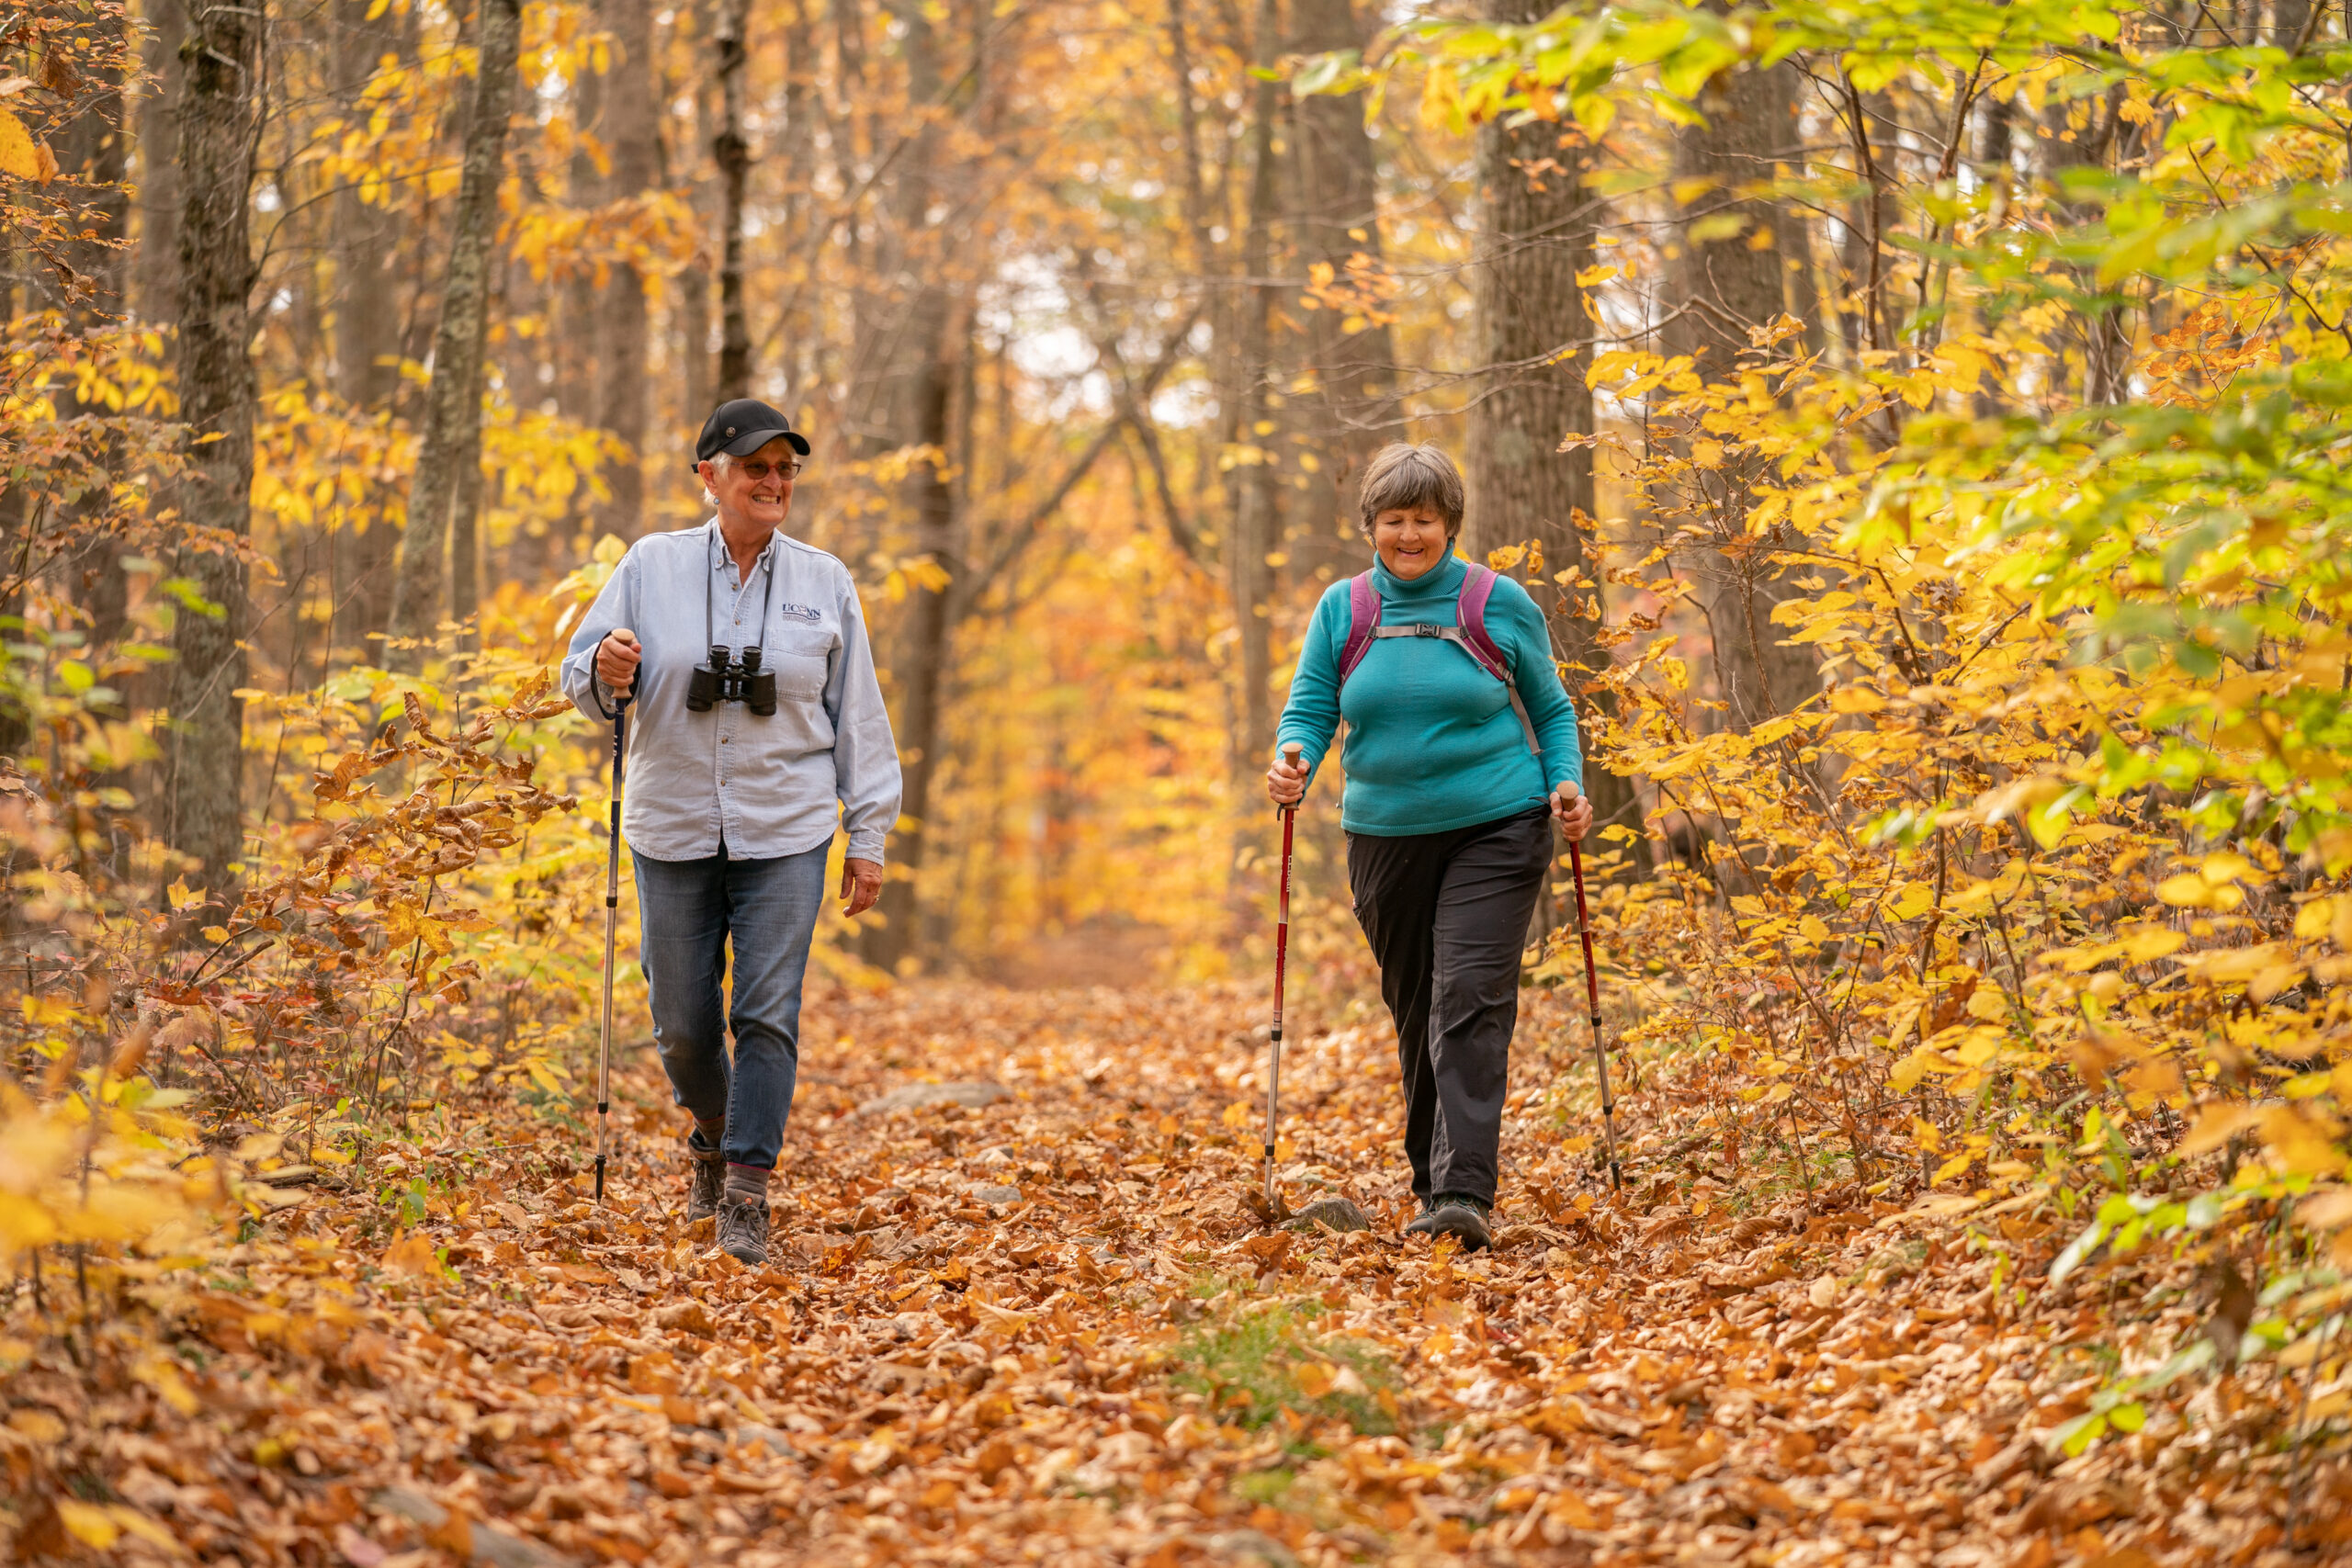 Two people walking through a wooded area in the fall.